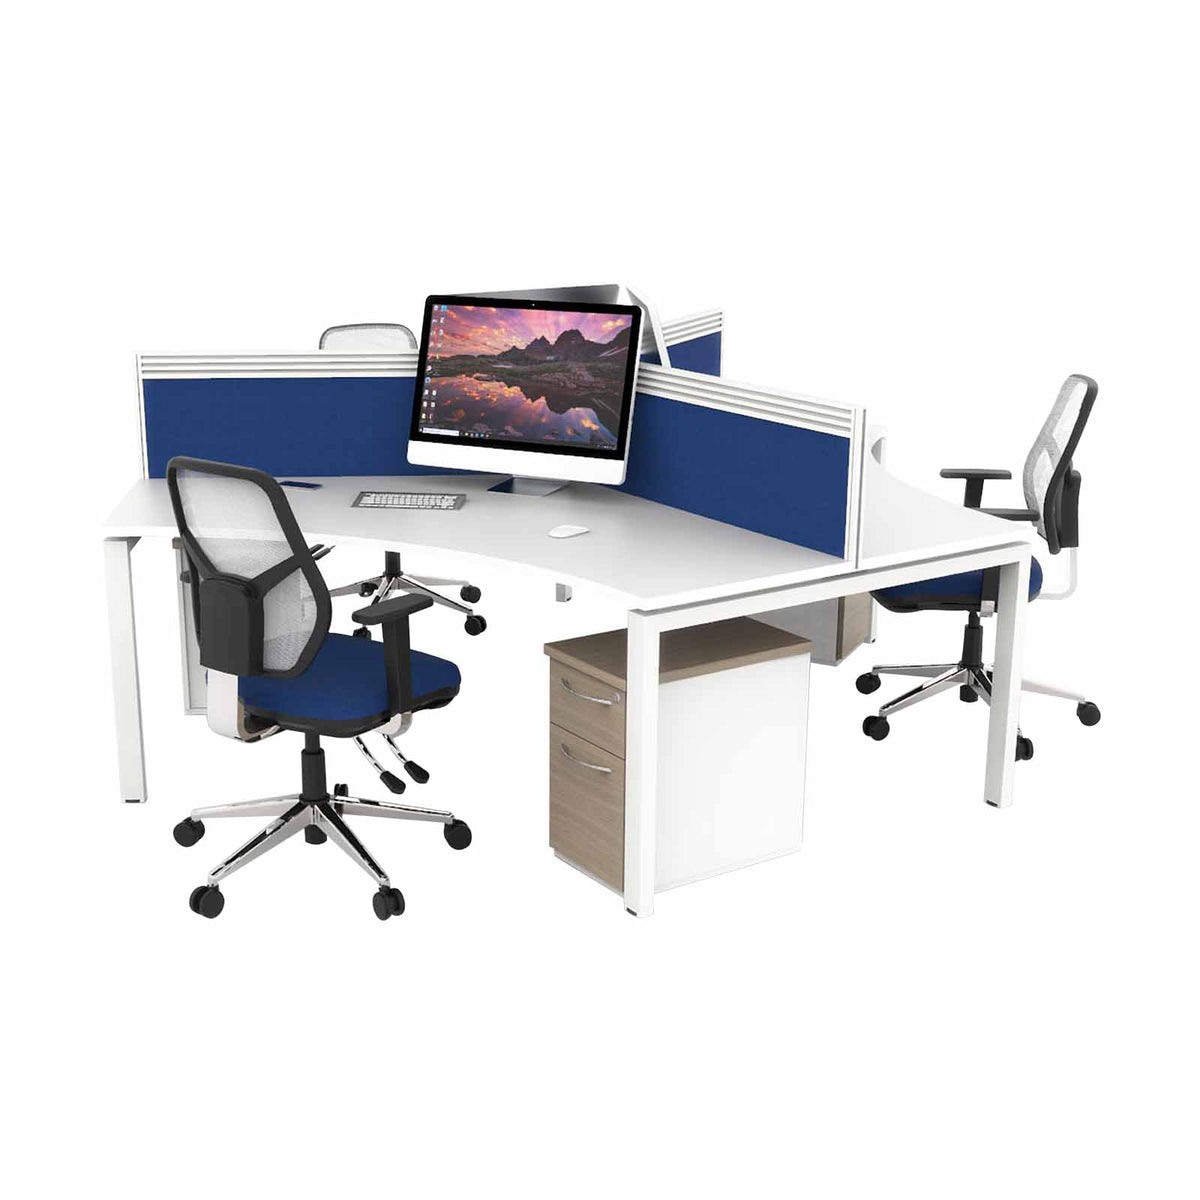 MADE TO ORDER 3 Seater Telesales Bench Desk W1200/1200 x D600/600 x H740mm